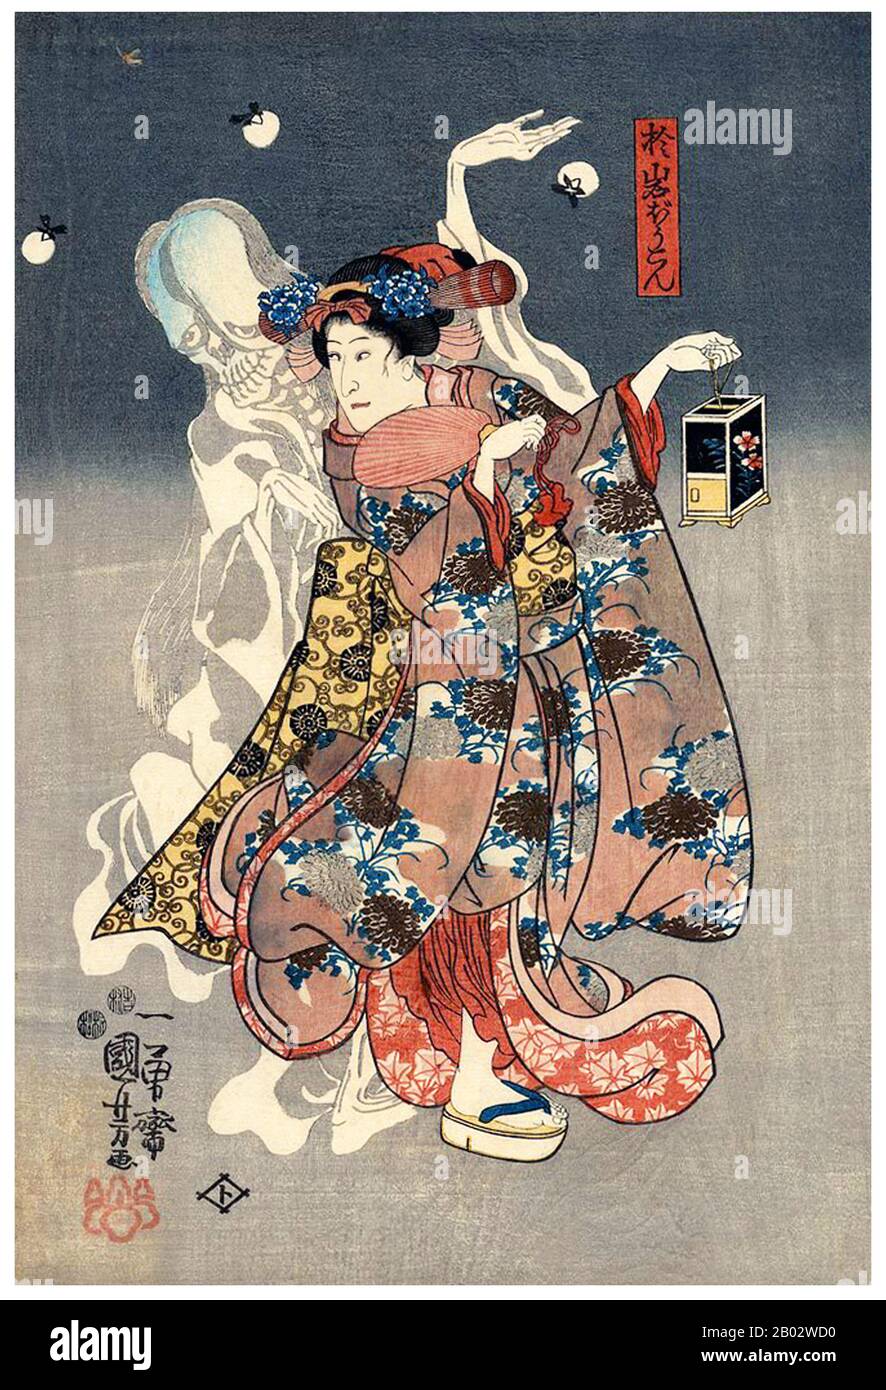 Utagawa Kuniyoshi (January 1, 1798 - April 14, 1861) was one of the last great masters of the Japanese ukiyo-e style of woodblock prints and painting. He is associated with the Utagawa school.  The range of Kuniyoshi's preferred subjects included many genres: landscapes, beautiful women, Kabuki actors, cats, and mythical animals. He is known for depictions of the battles of samurai and legendary heroes. His artwork was affected by Western influences in landscape painting and caricature. Stock Photo